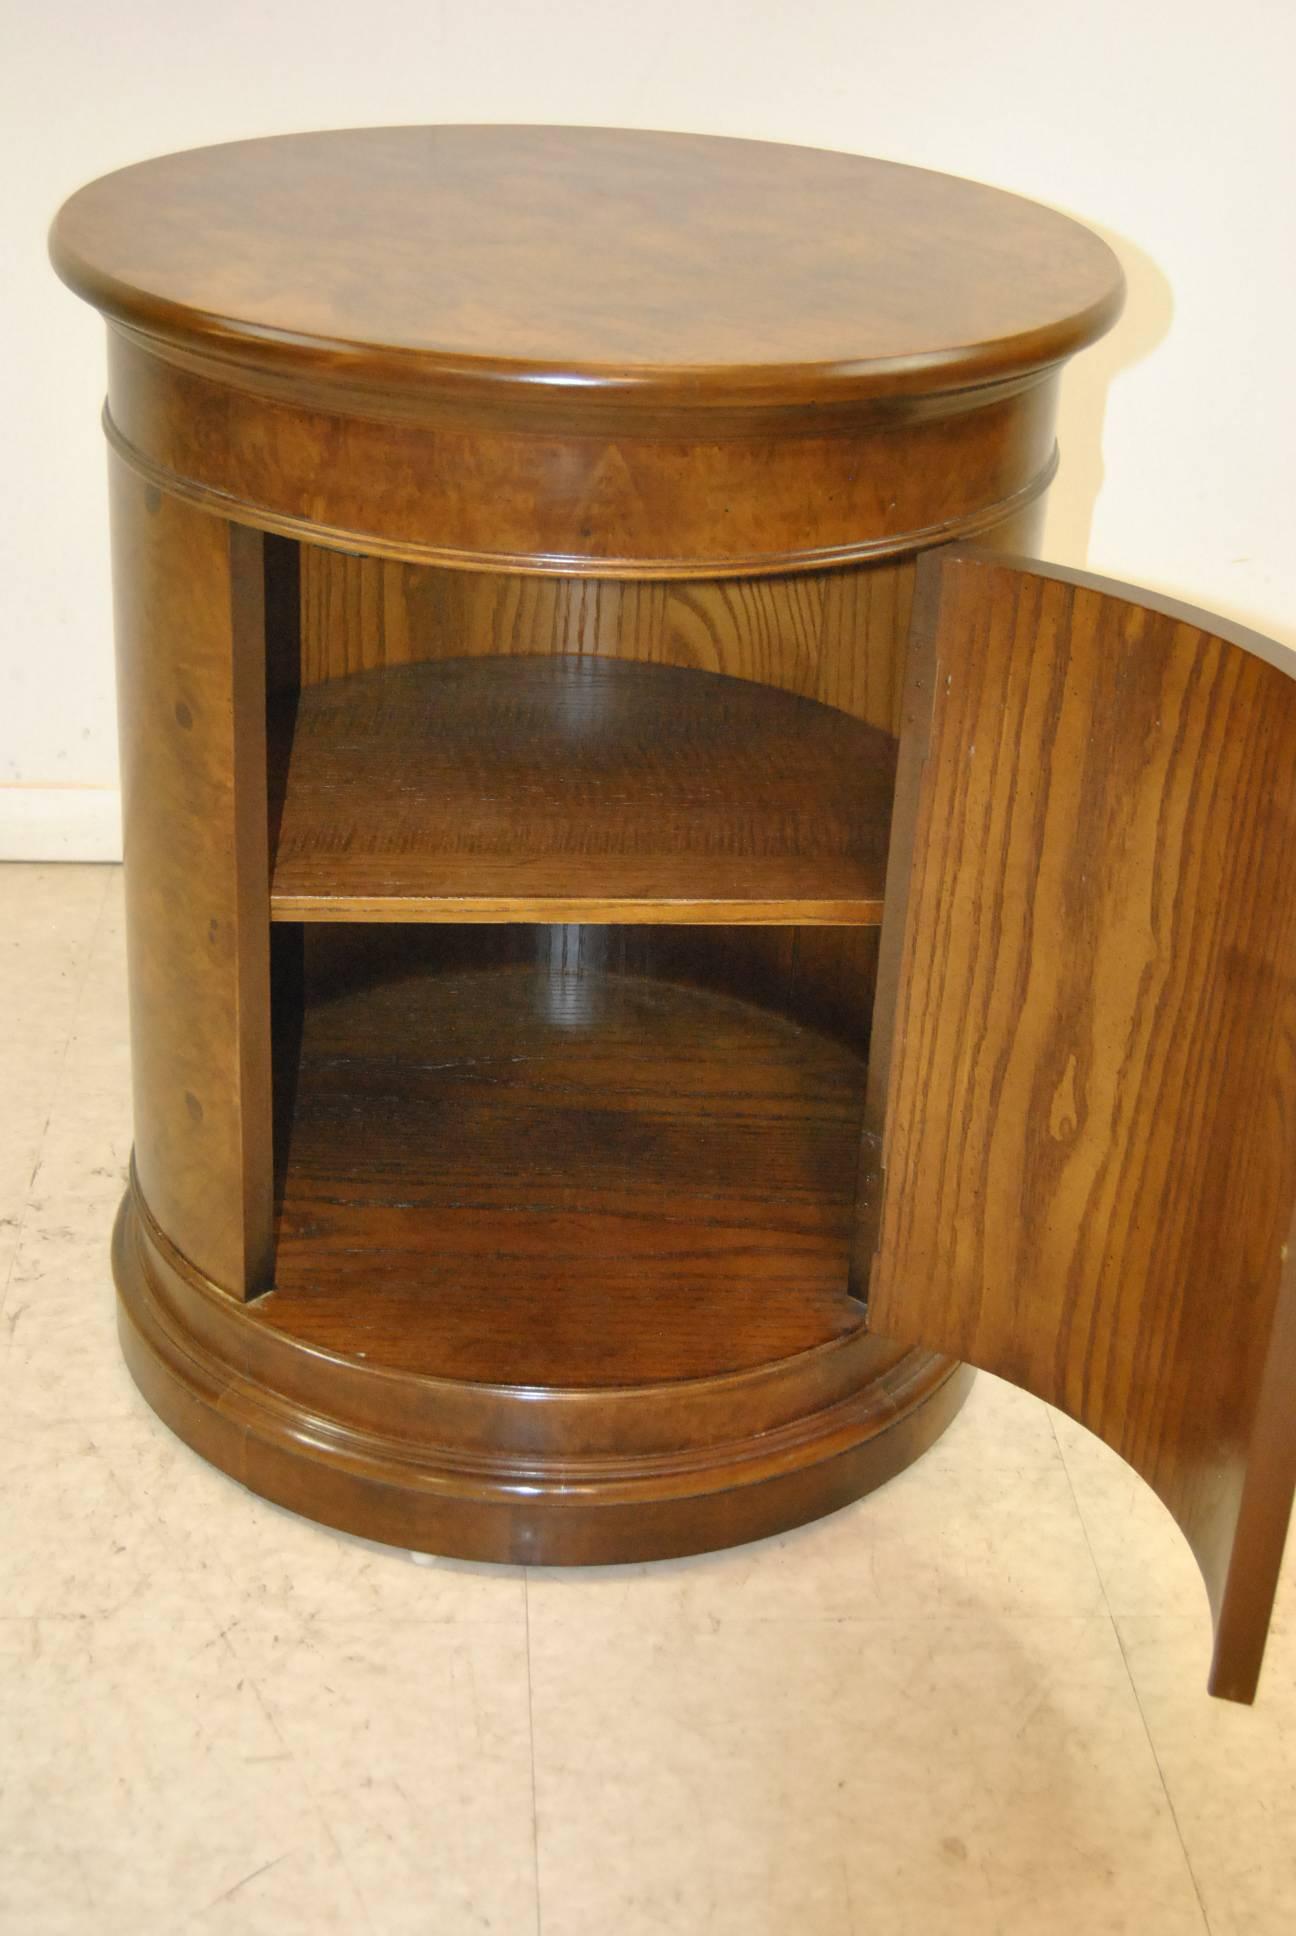 Modern Burled Walnut Round Pedestal Storage Stand or Table by Henredon For Sale